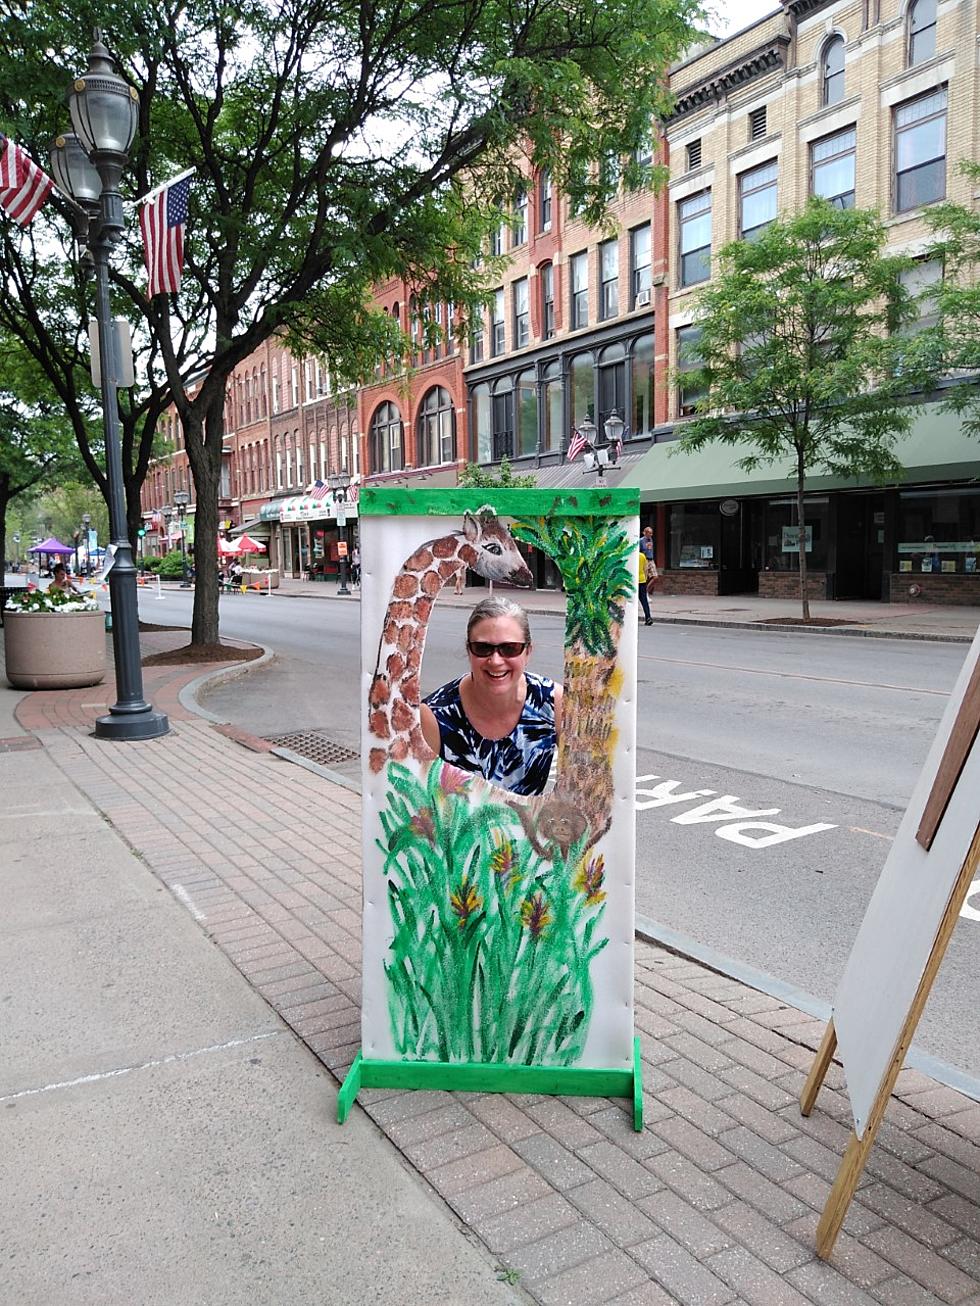 &#8216;Meet Me on Main St.&#8217; Kickoff Sets Awesome Tone For Summer Fun